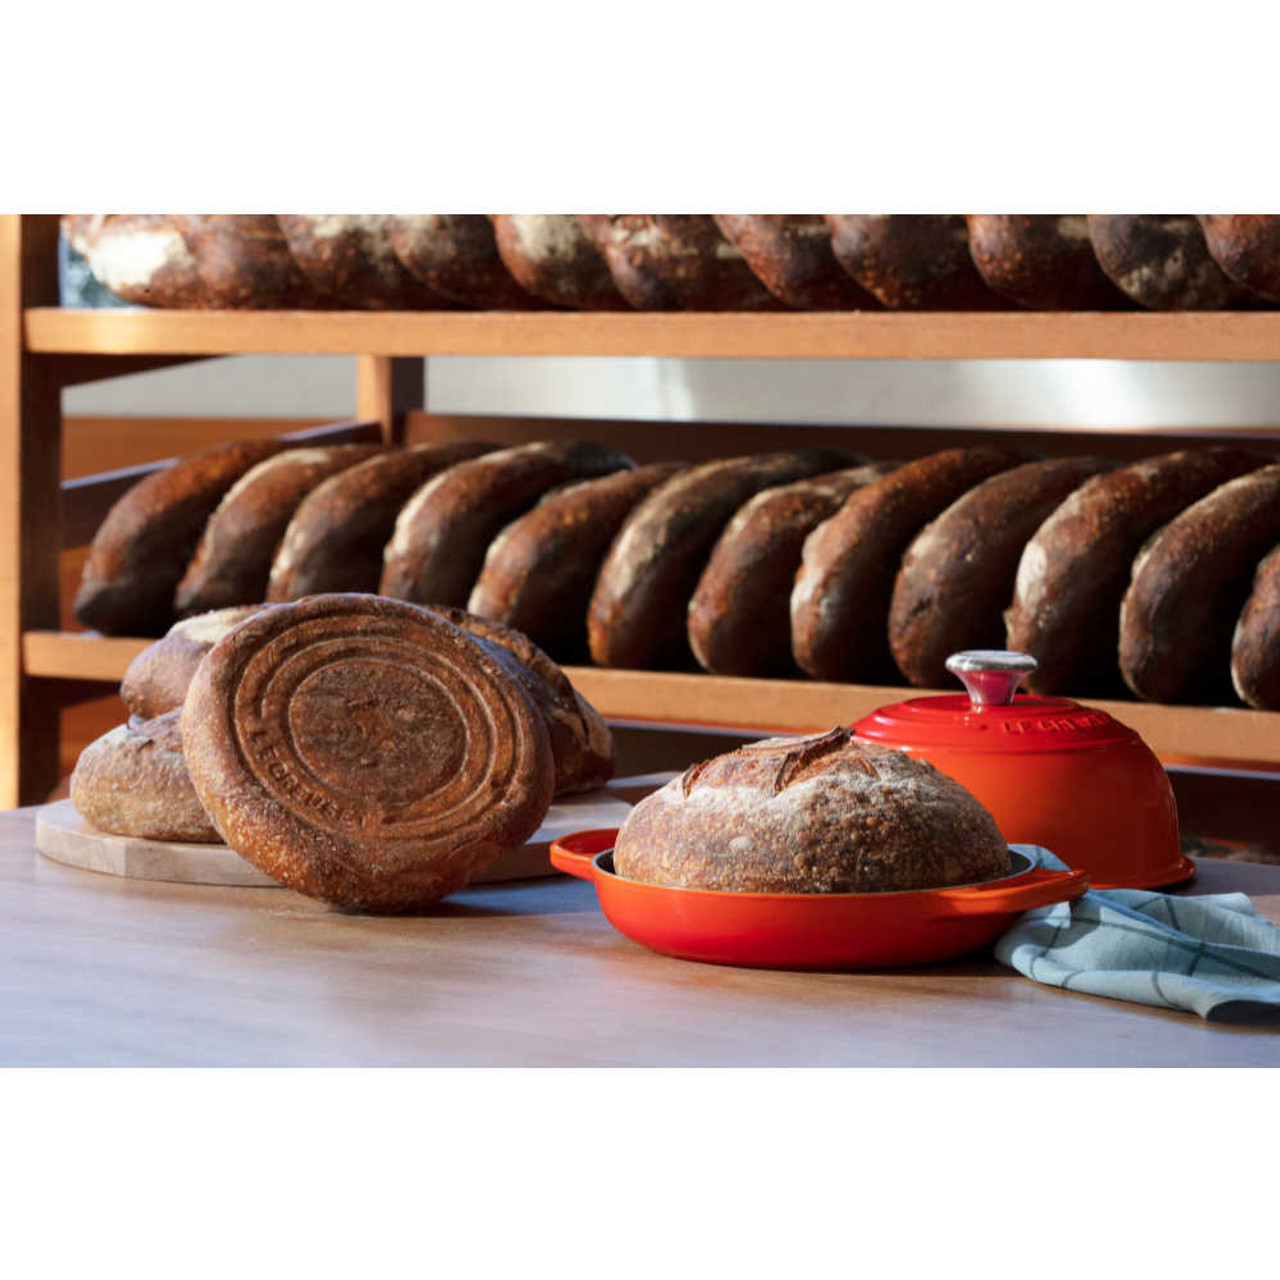 https://cdn11.bigcommerce.com/s-hccytny0od/images/stencil/1280x1280/products/4524/18109/Le_Creuset_Cast_Iron_Bread_Oven_1__00985.1666741654.jpg?c=2?imbypass=on